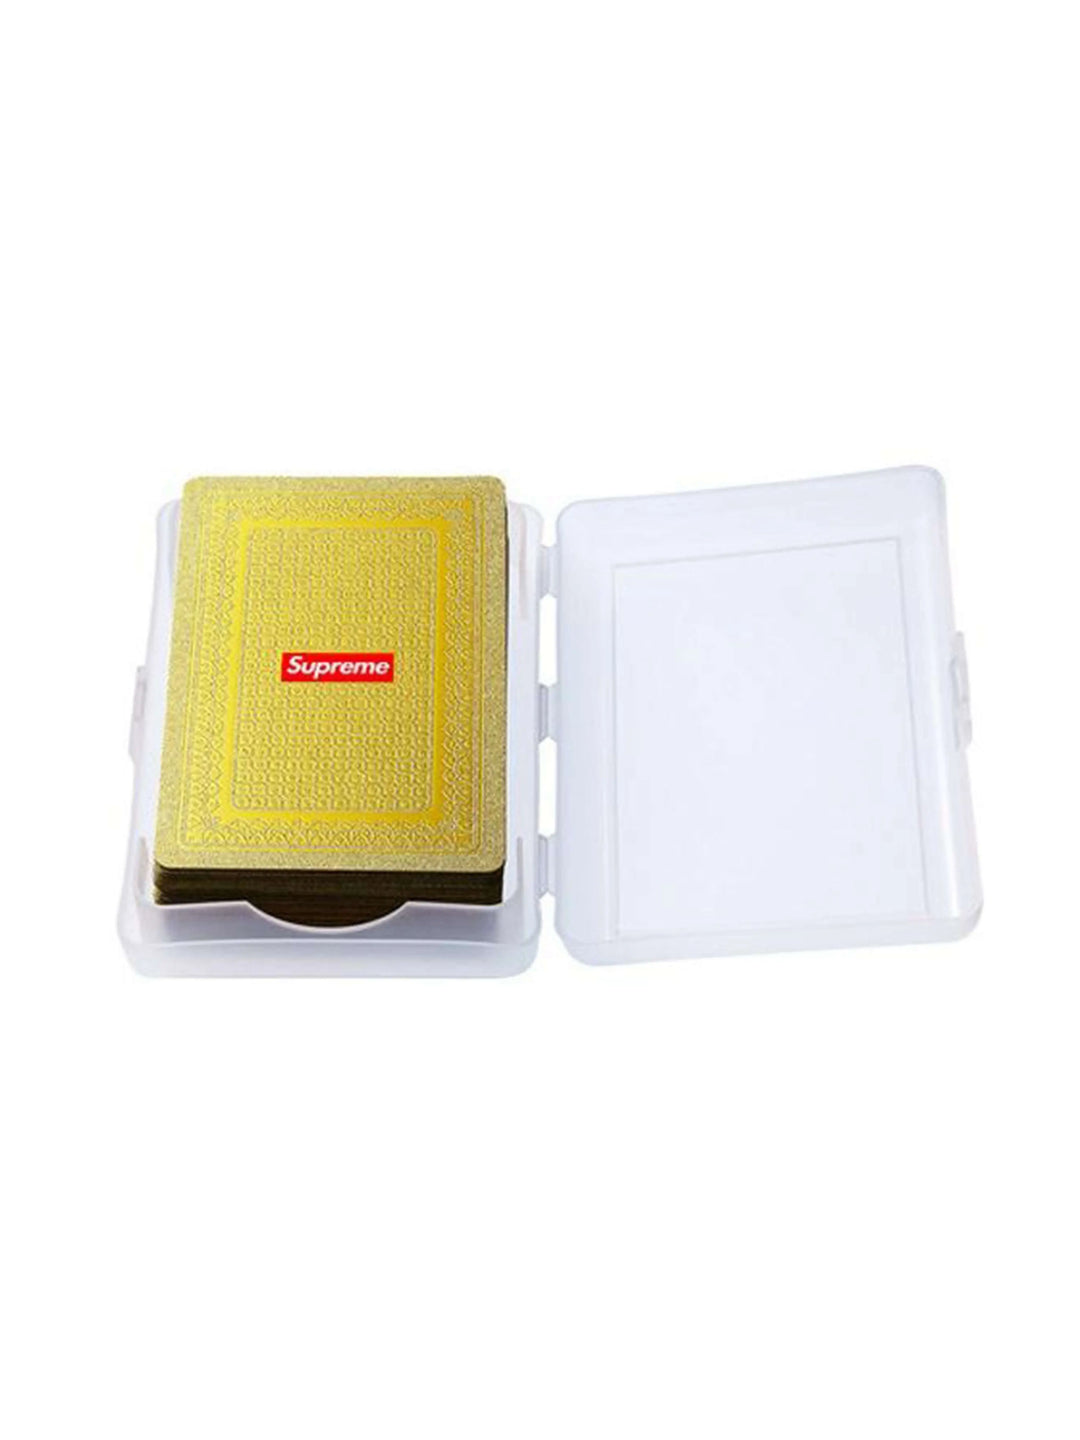 Supreme SS13 Gold Playing Cards Supreme